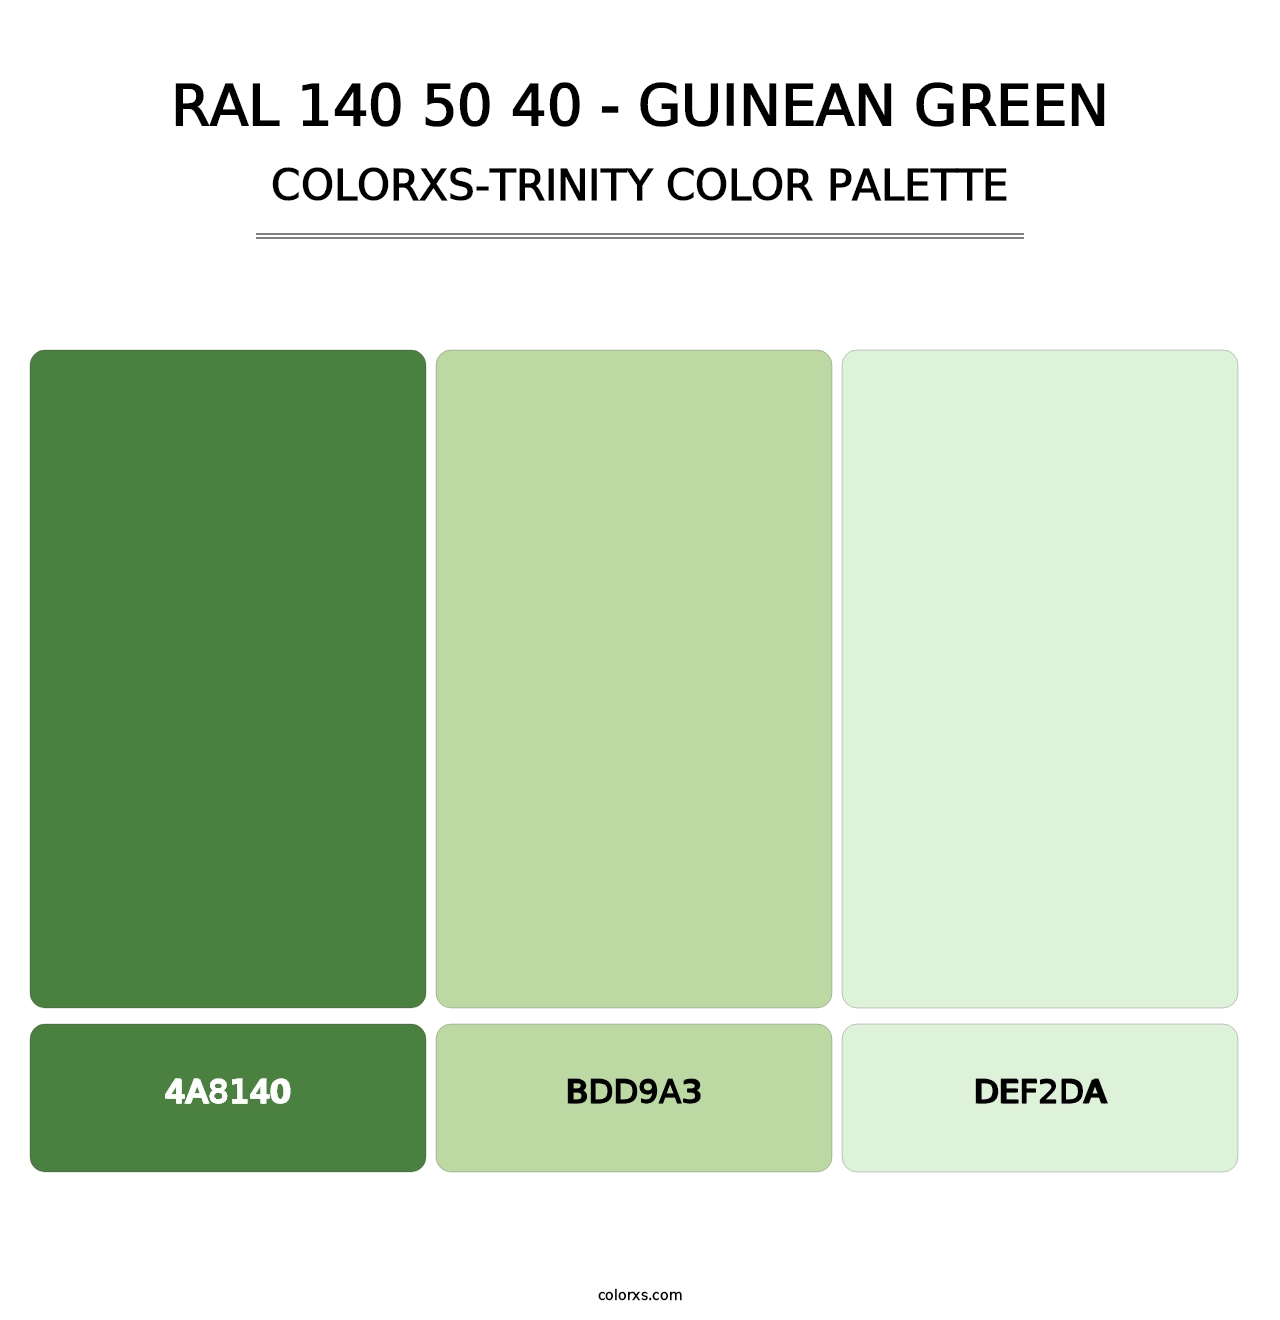 RAL 140 50 40 - Guinean Green - Colorxs Trinity Palette